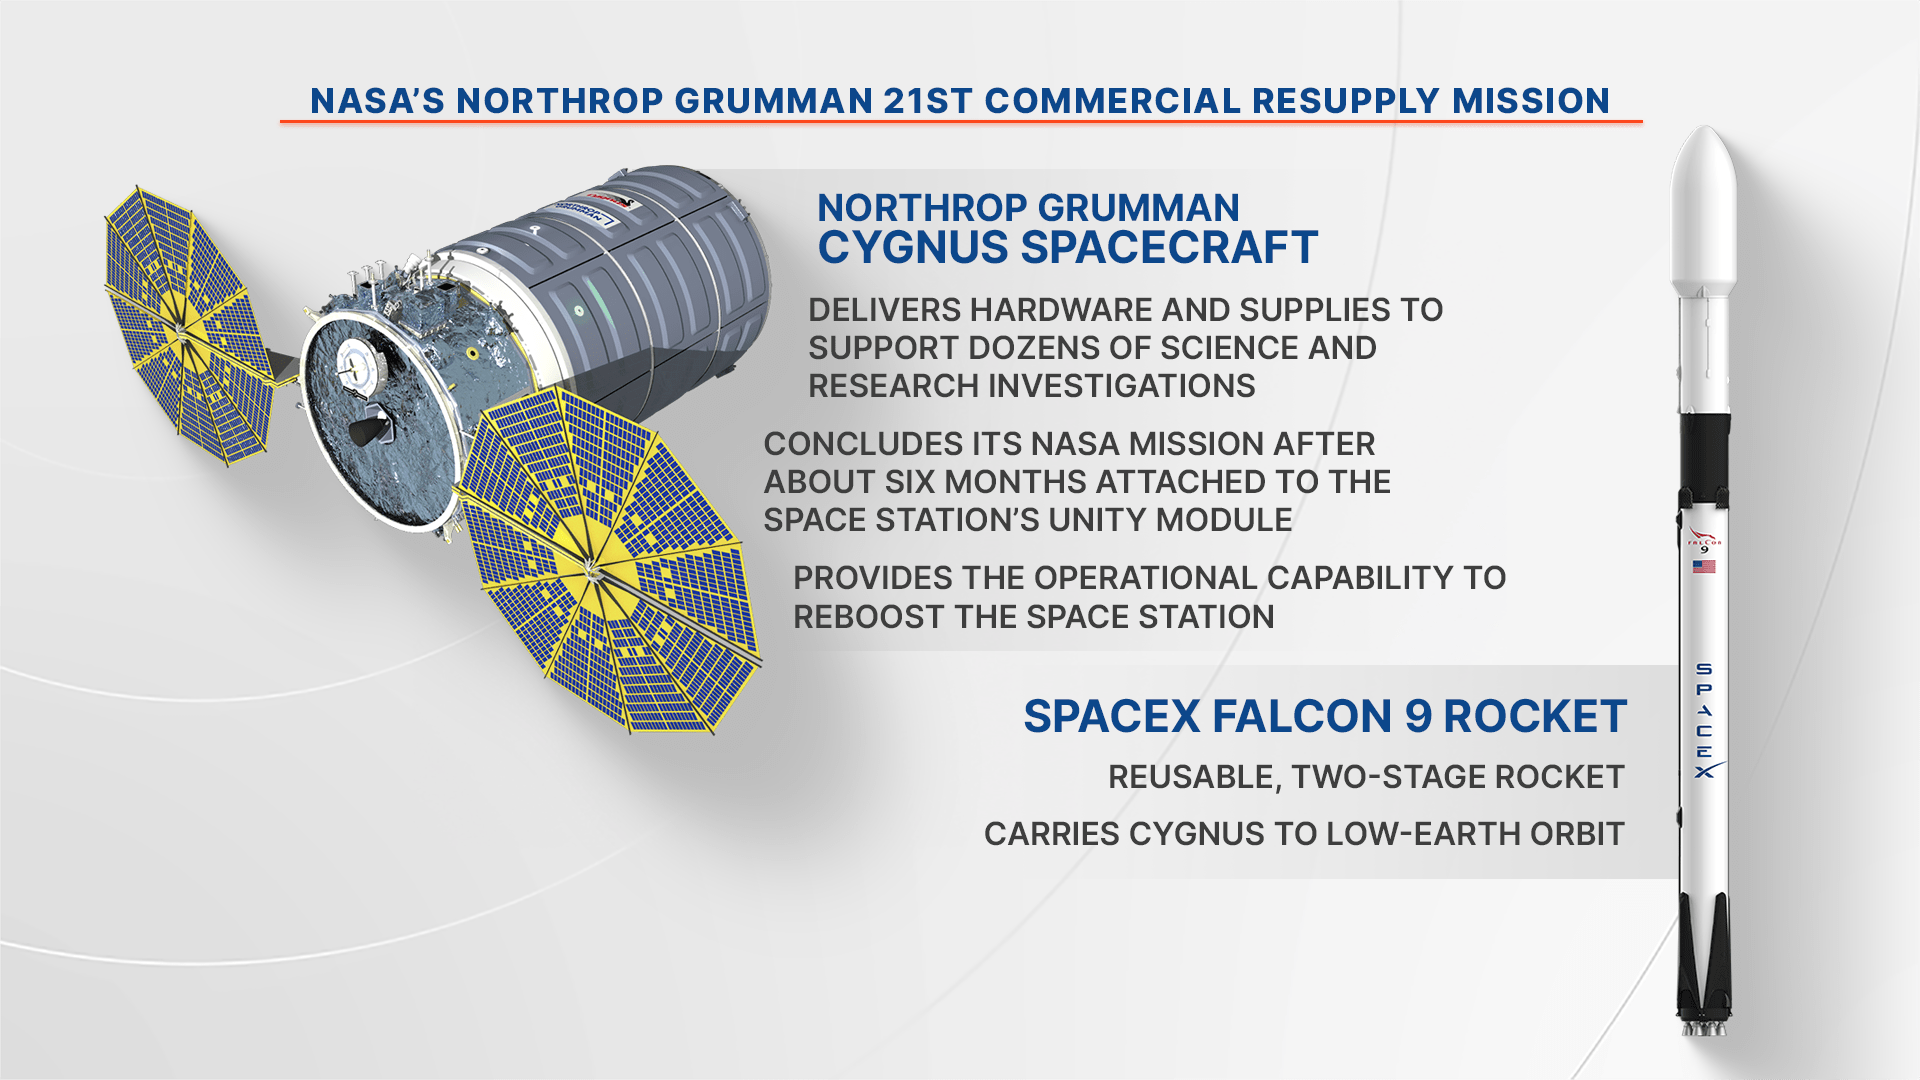 NASA's Northrop Grumman 21st commercial resupply mission will launch on a SpaceX Falcon 9 rocket to deliver research and supplies to the International Space Station.